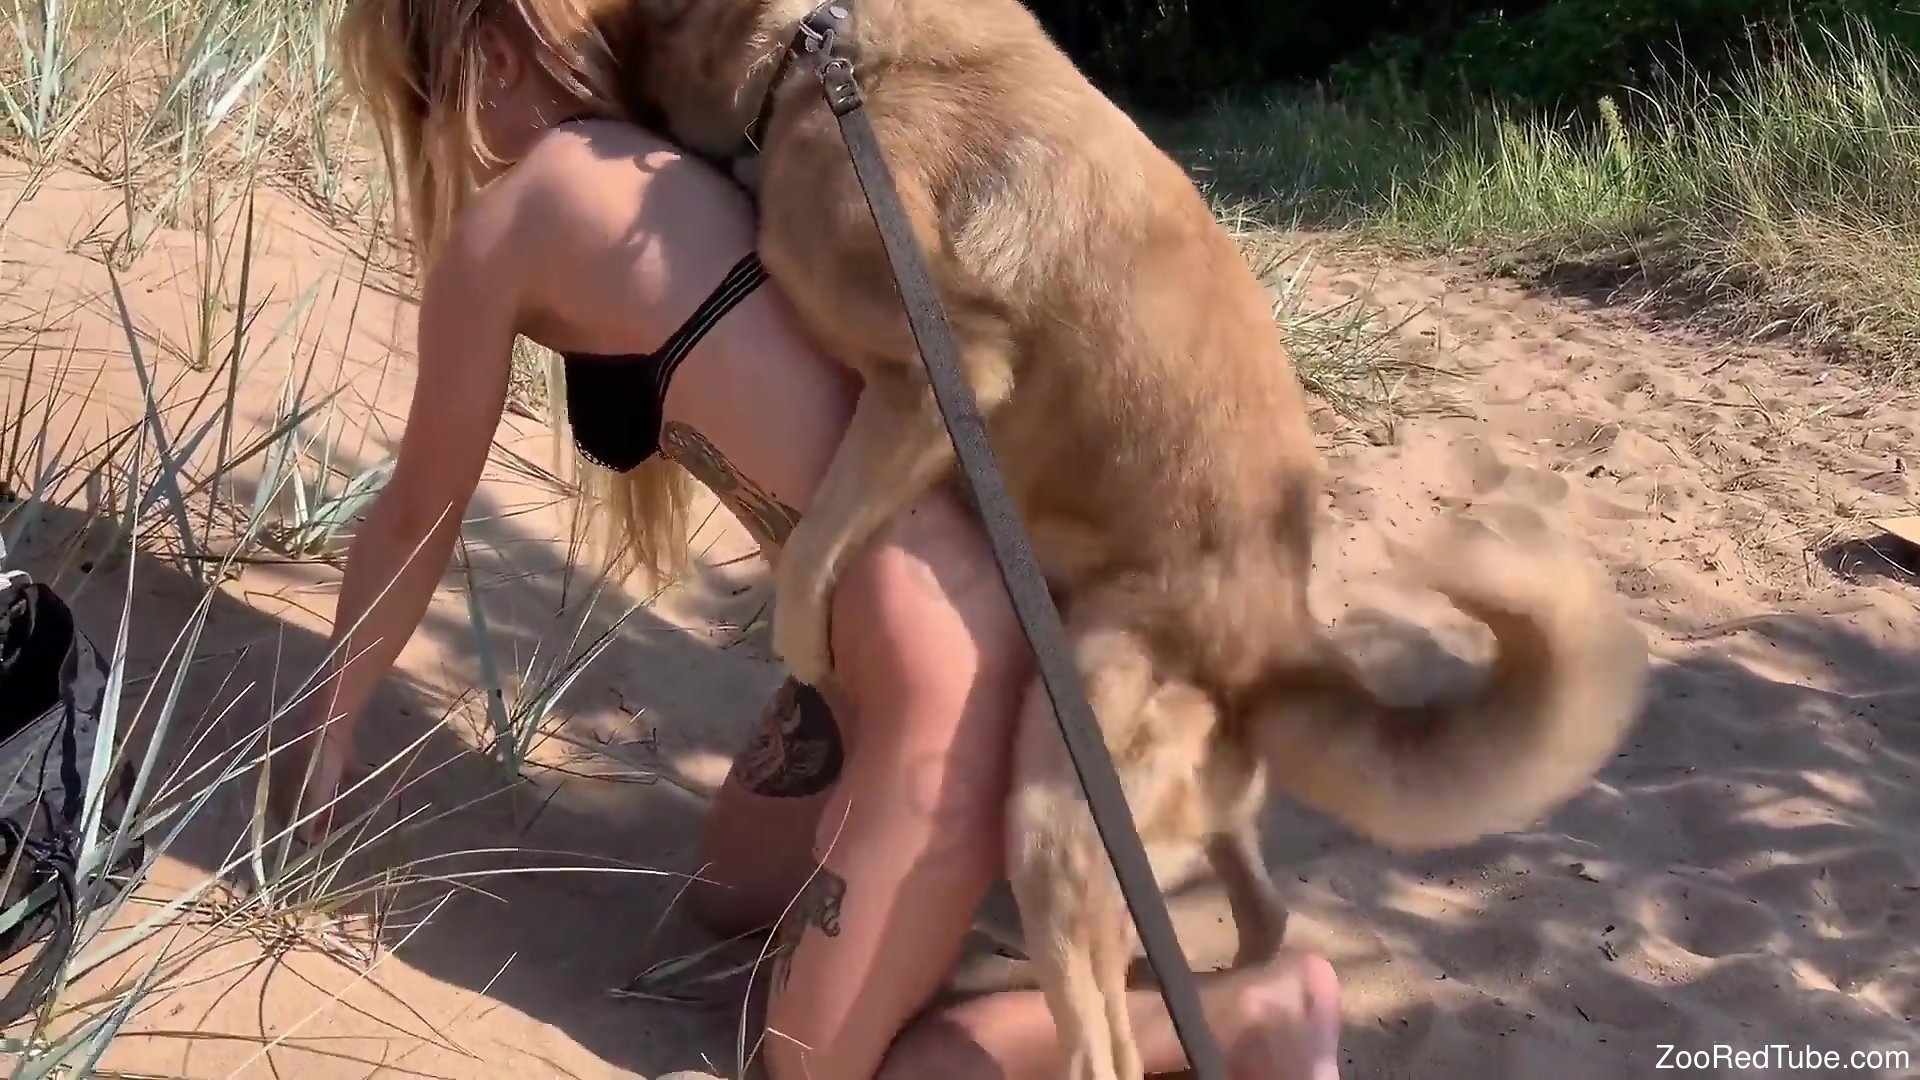 Nude female enjoys outdoor sex by the beach with her dog 